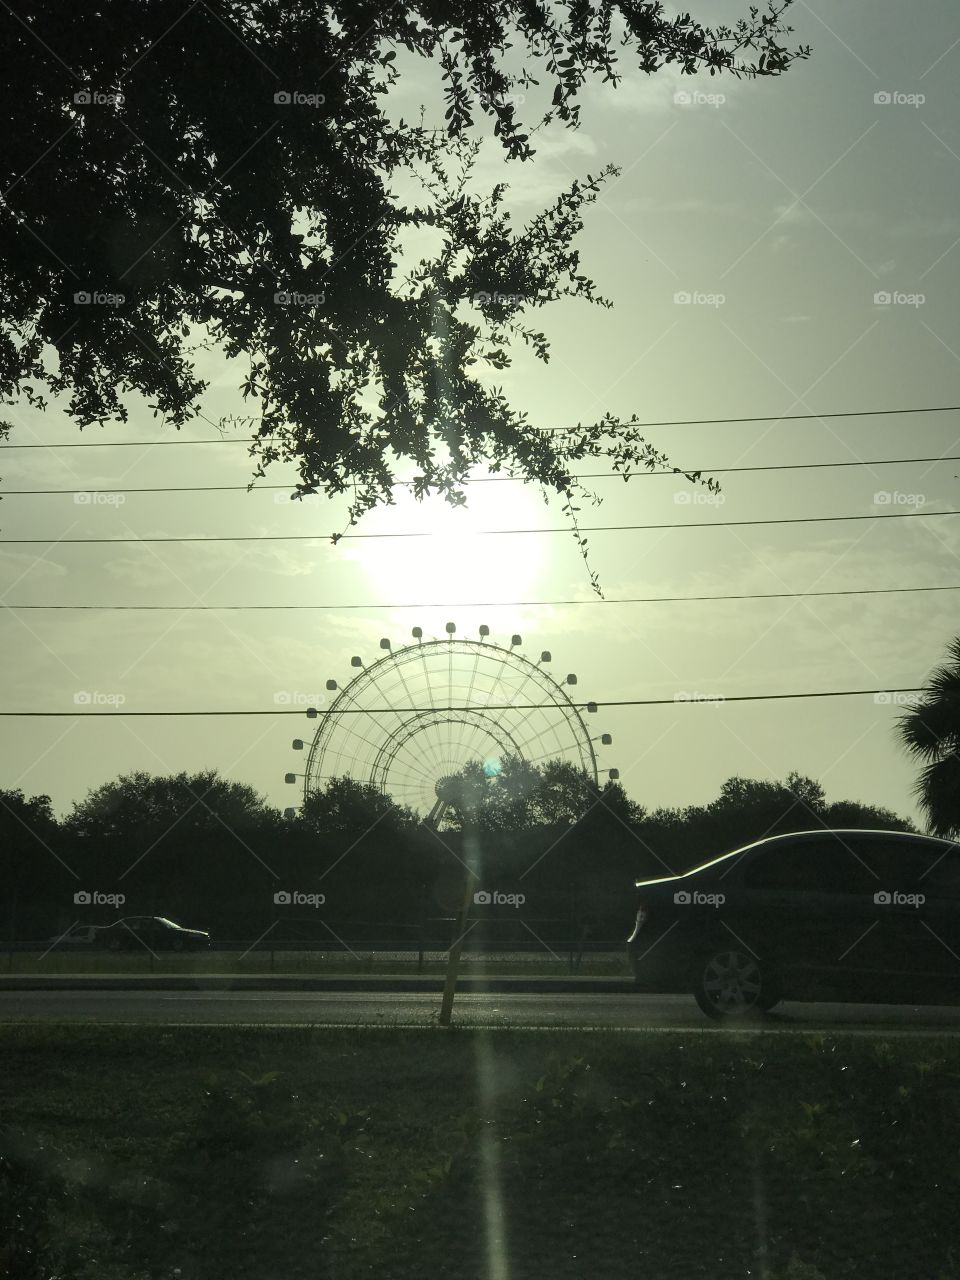 .odnalrO ni detacol tneduts FCU nA  .asleS yb kcilC Follow me @Selsa.Notes, @Selsa.Clicks, or @Selsa.Quotes.  The Orlando Eye.  Bought by CocaCola, July 28, 2016.  Was a business investment to be able to observe the city from the ferris wheel that stands 400 feet high.  It spins at a very slow rate and cost $25 to ride.  It opened April 29th, 2015.  Total of 75 photos in this album of the Coca Cola eye.  The colors displayed on the daily basis is red & white representing classic coke.  A white color that skips to represent carbonation  and green every once in a while for the sugar cane coke.  Then the rainbow colors sadly represent the Pulse shooting victims (album) and the solid blue is for the law enforcement officers killed in the line of duty. In Aug17.  Officer Baxter and Sgt. Howard.  Rest in Heavenly Peace. 